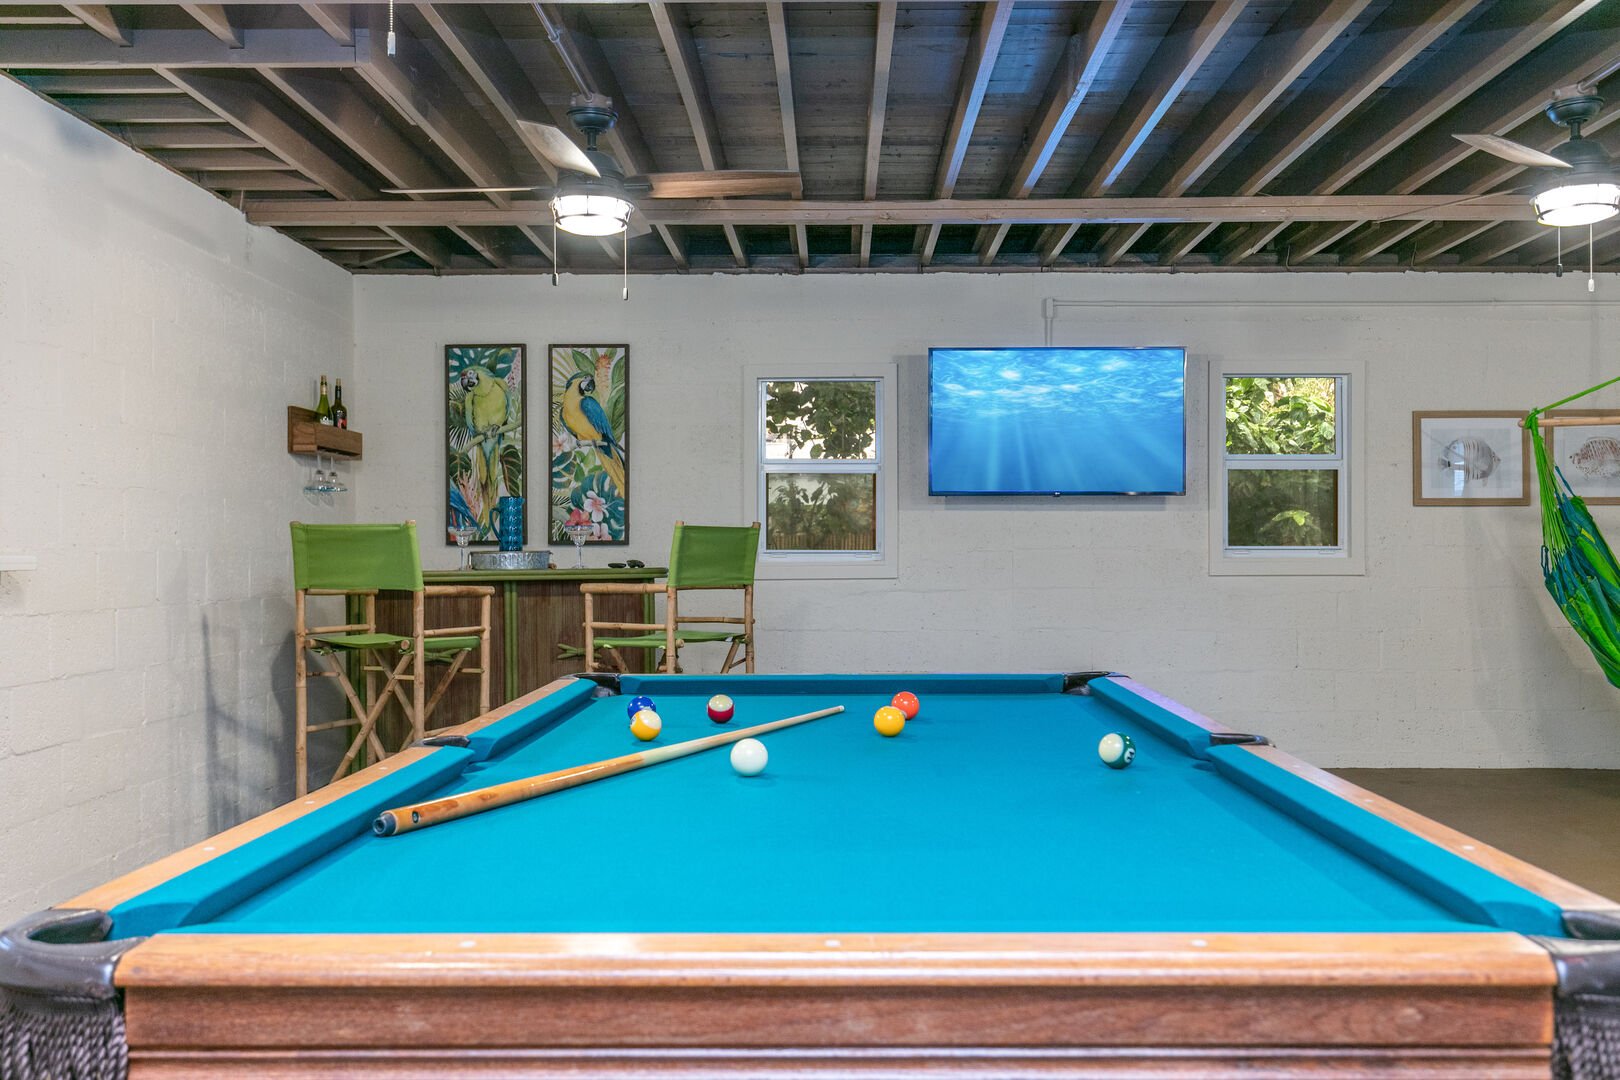 Finally there's the game room, shown here with the pool table!